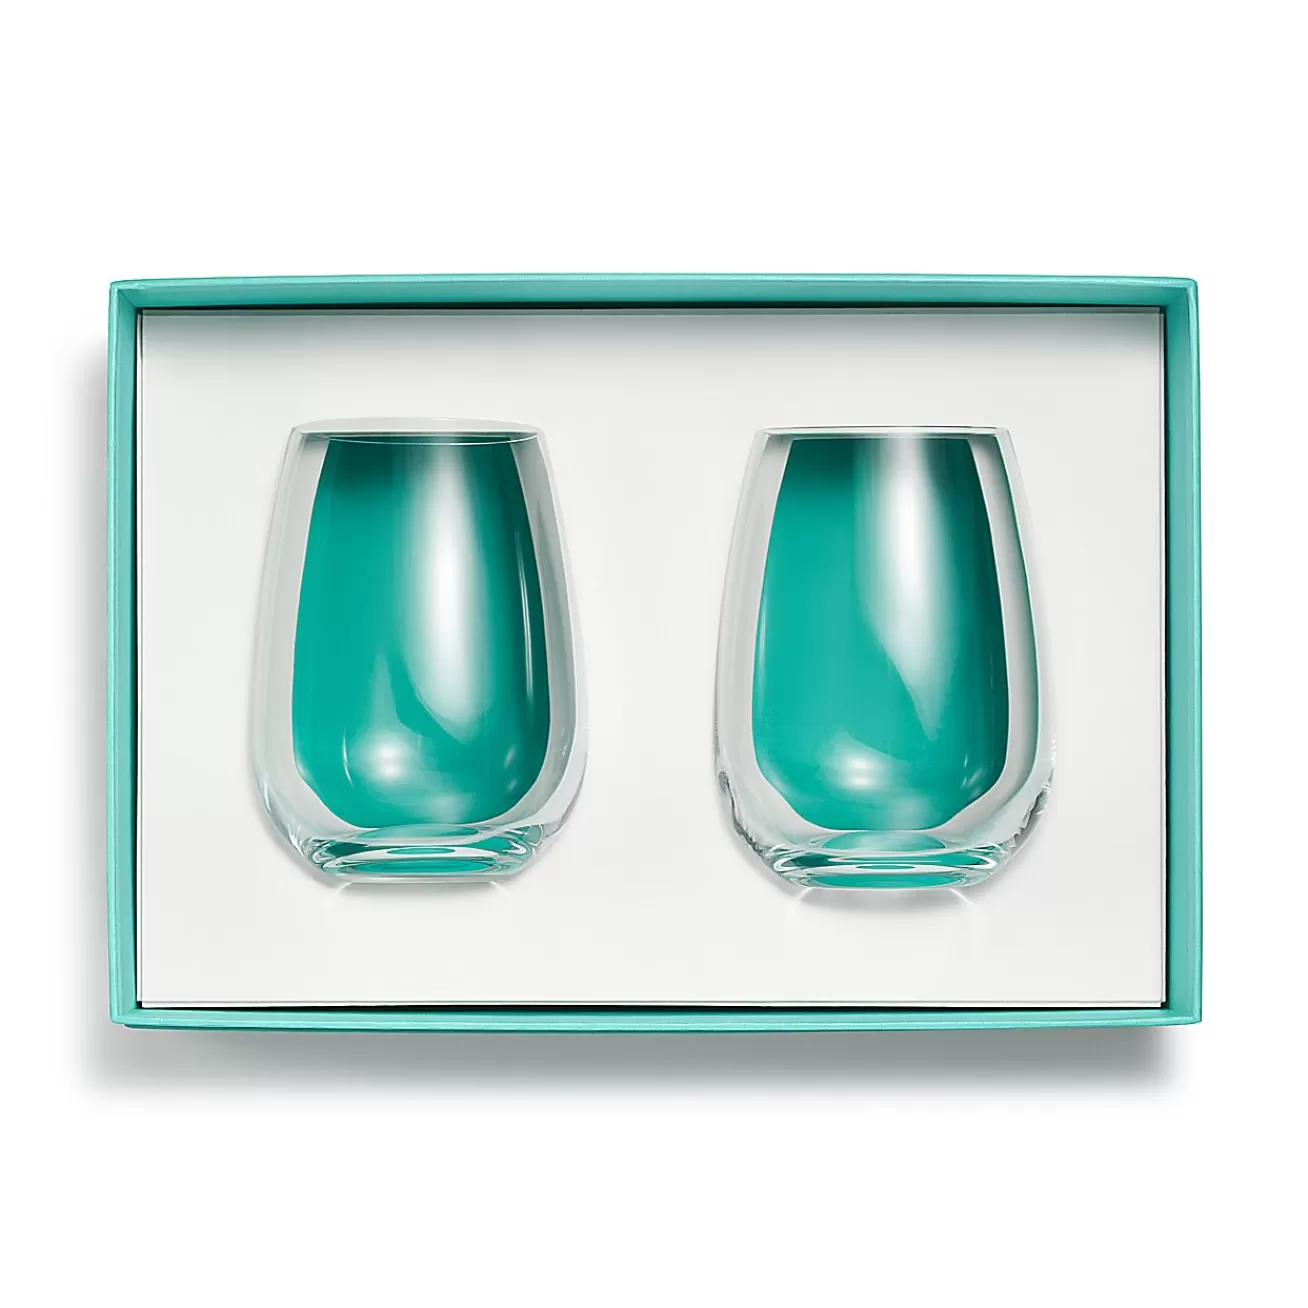 Tiffany & Co. Tiffany Home Essentials Stemless White Wine Glasses in Crystal Glass, Set of Two | ^ The Home | Housewarming Gifts